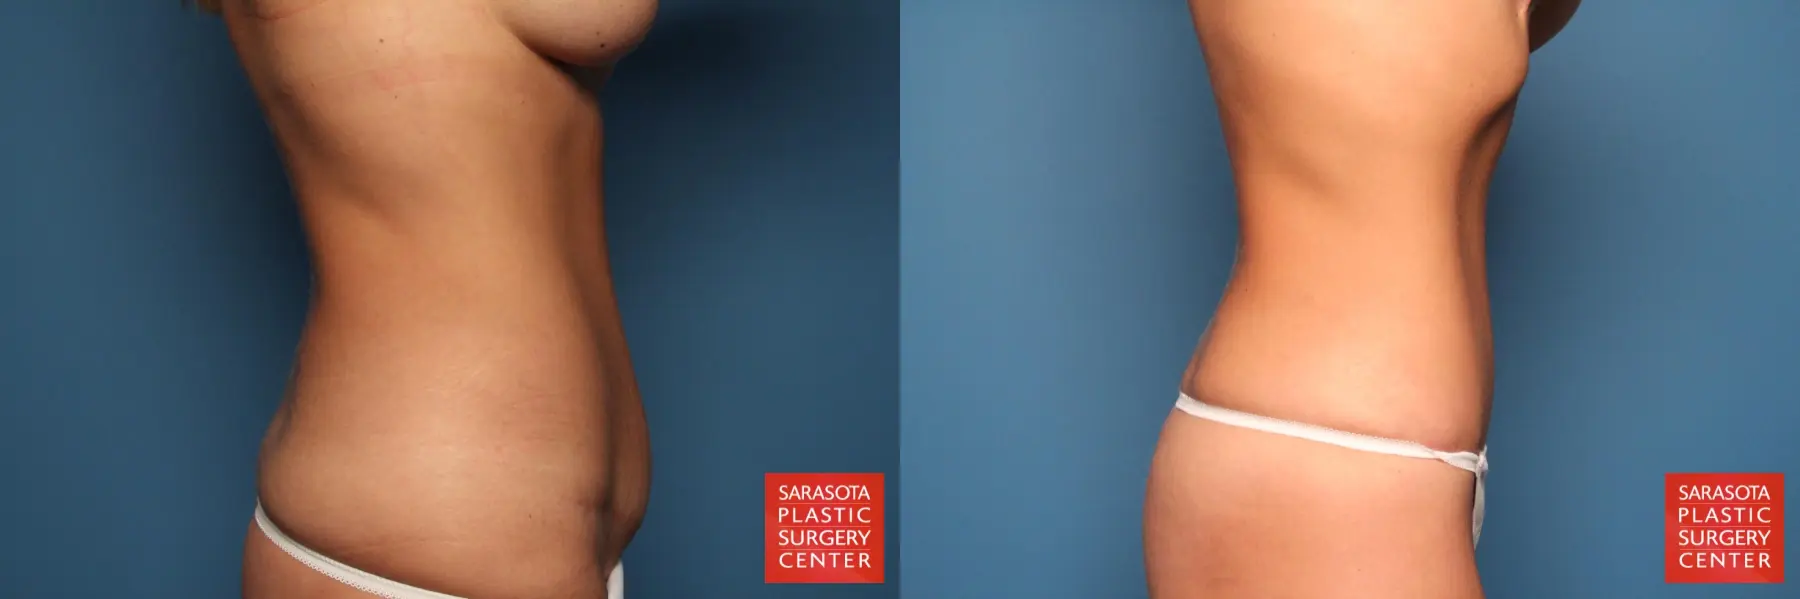 Tummy Tuck: Patient 9 - Before and After 7